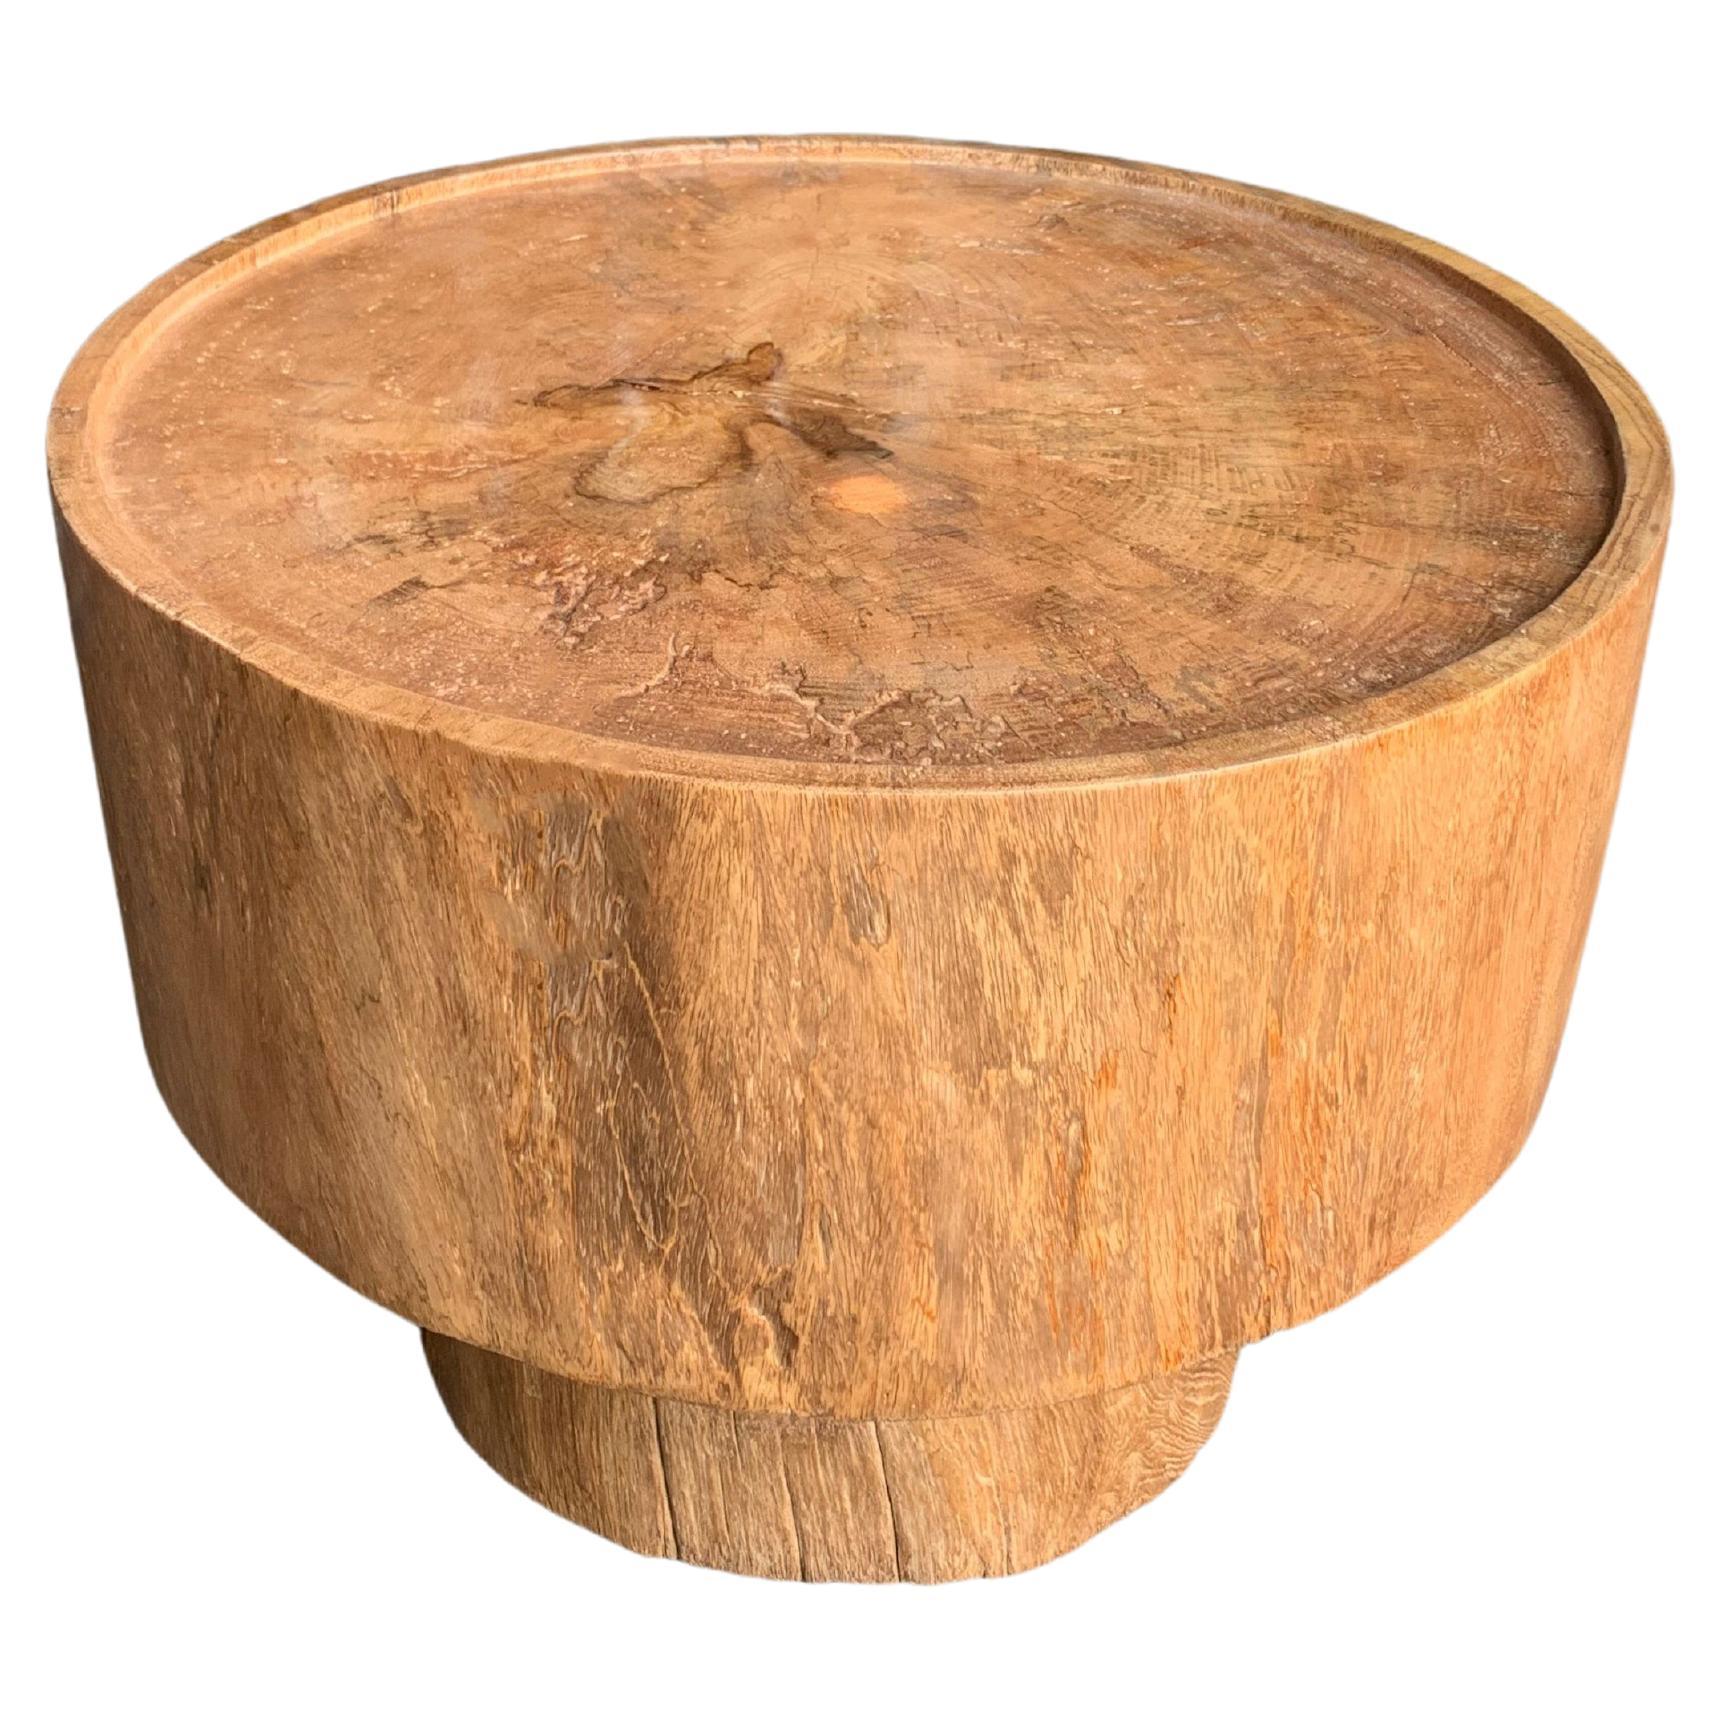 Sculptural Round Table Crafted from Solid Mango Wood, Natural Finish